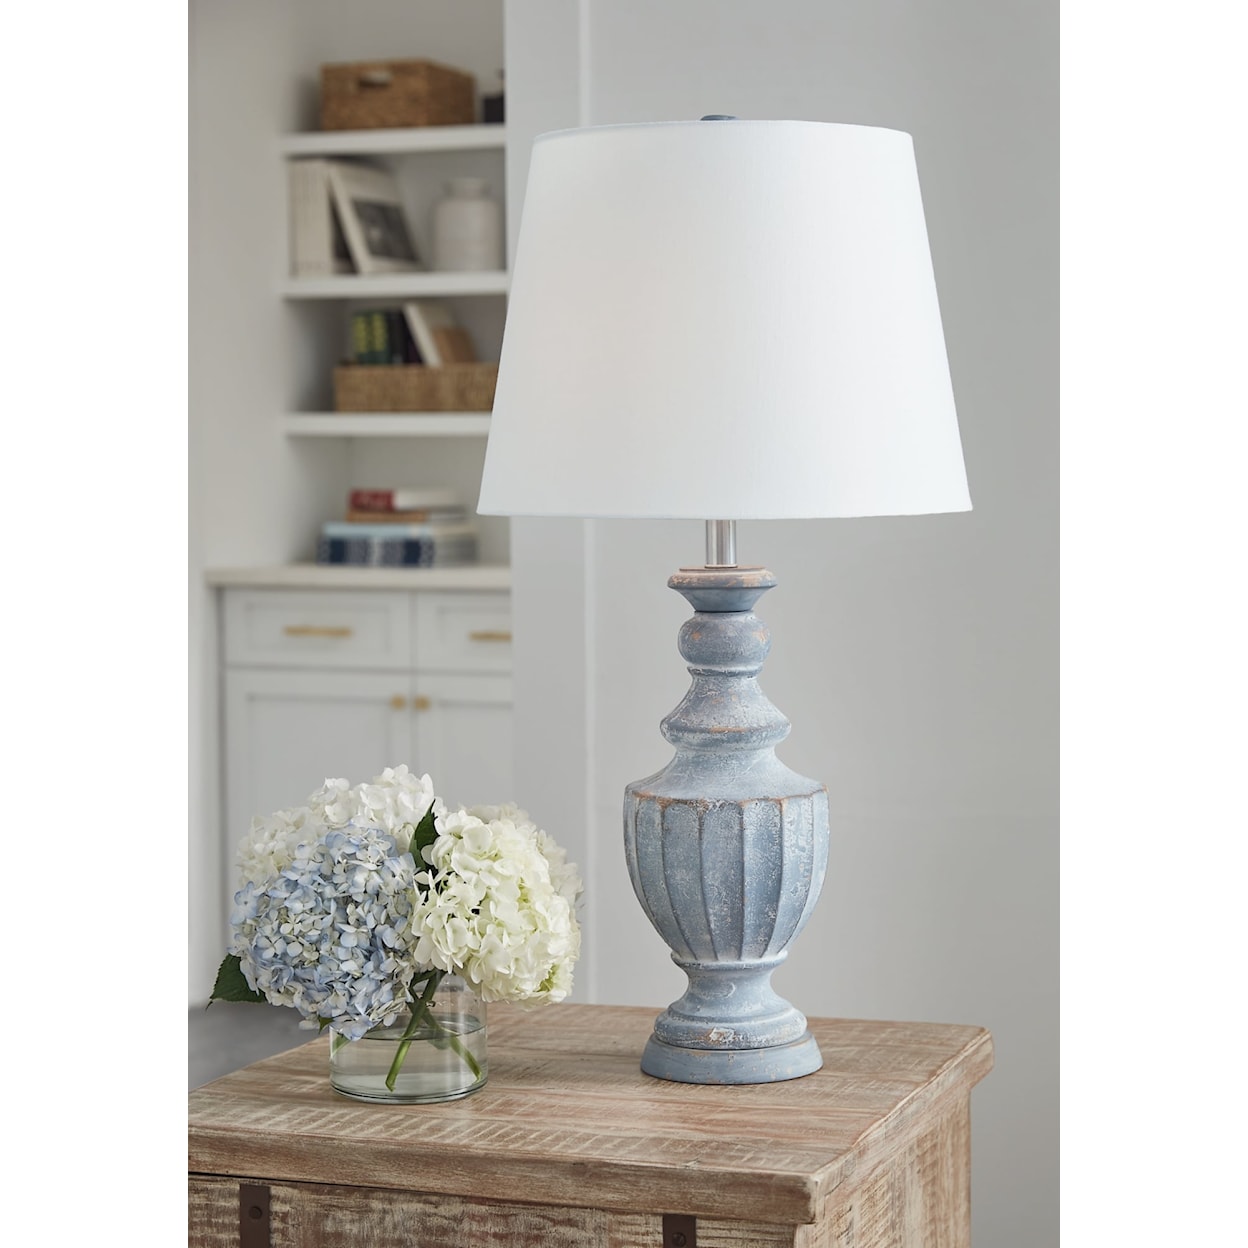 Signature Design by Ashley Cylerick Terracotta Table Lamp